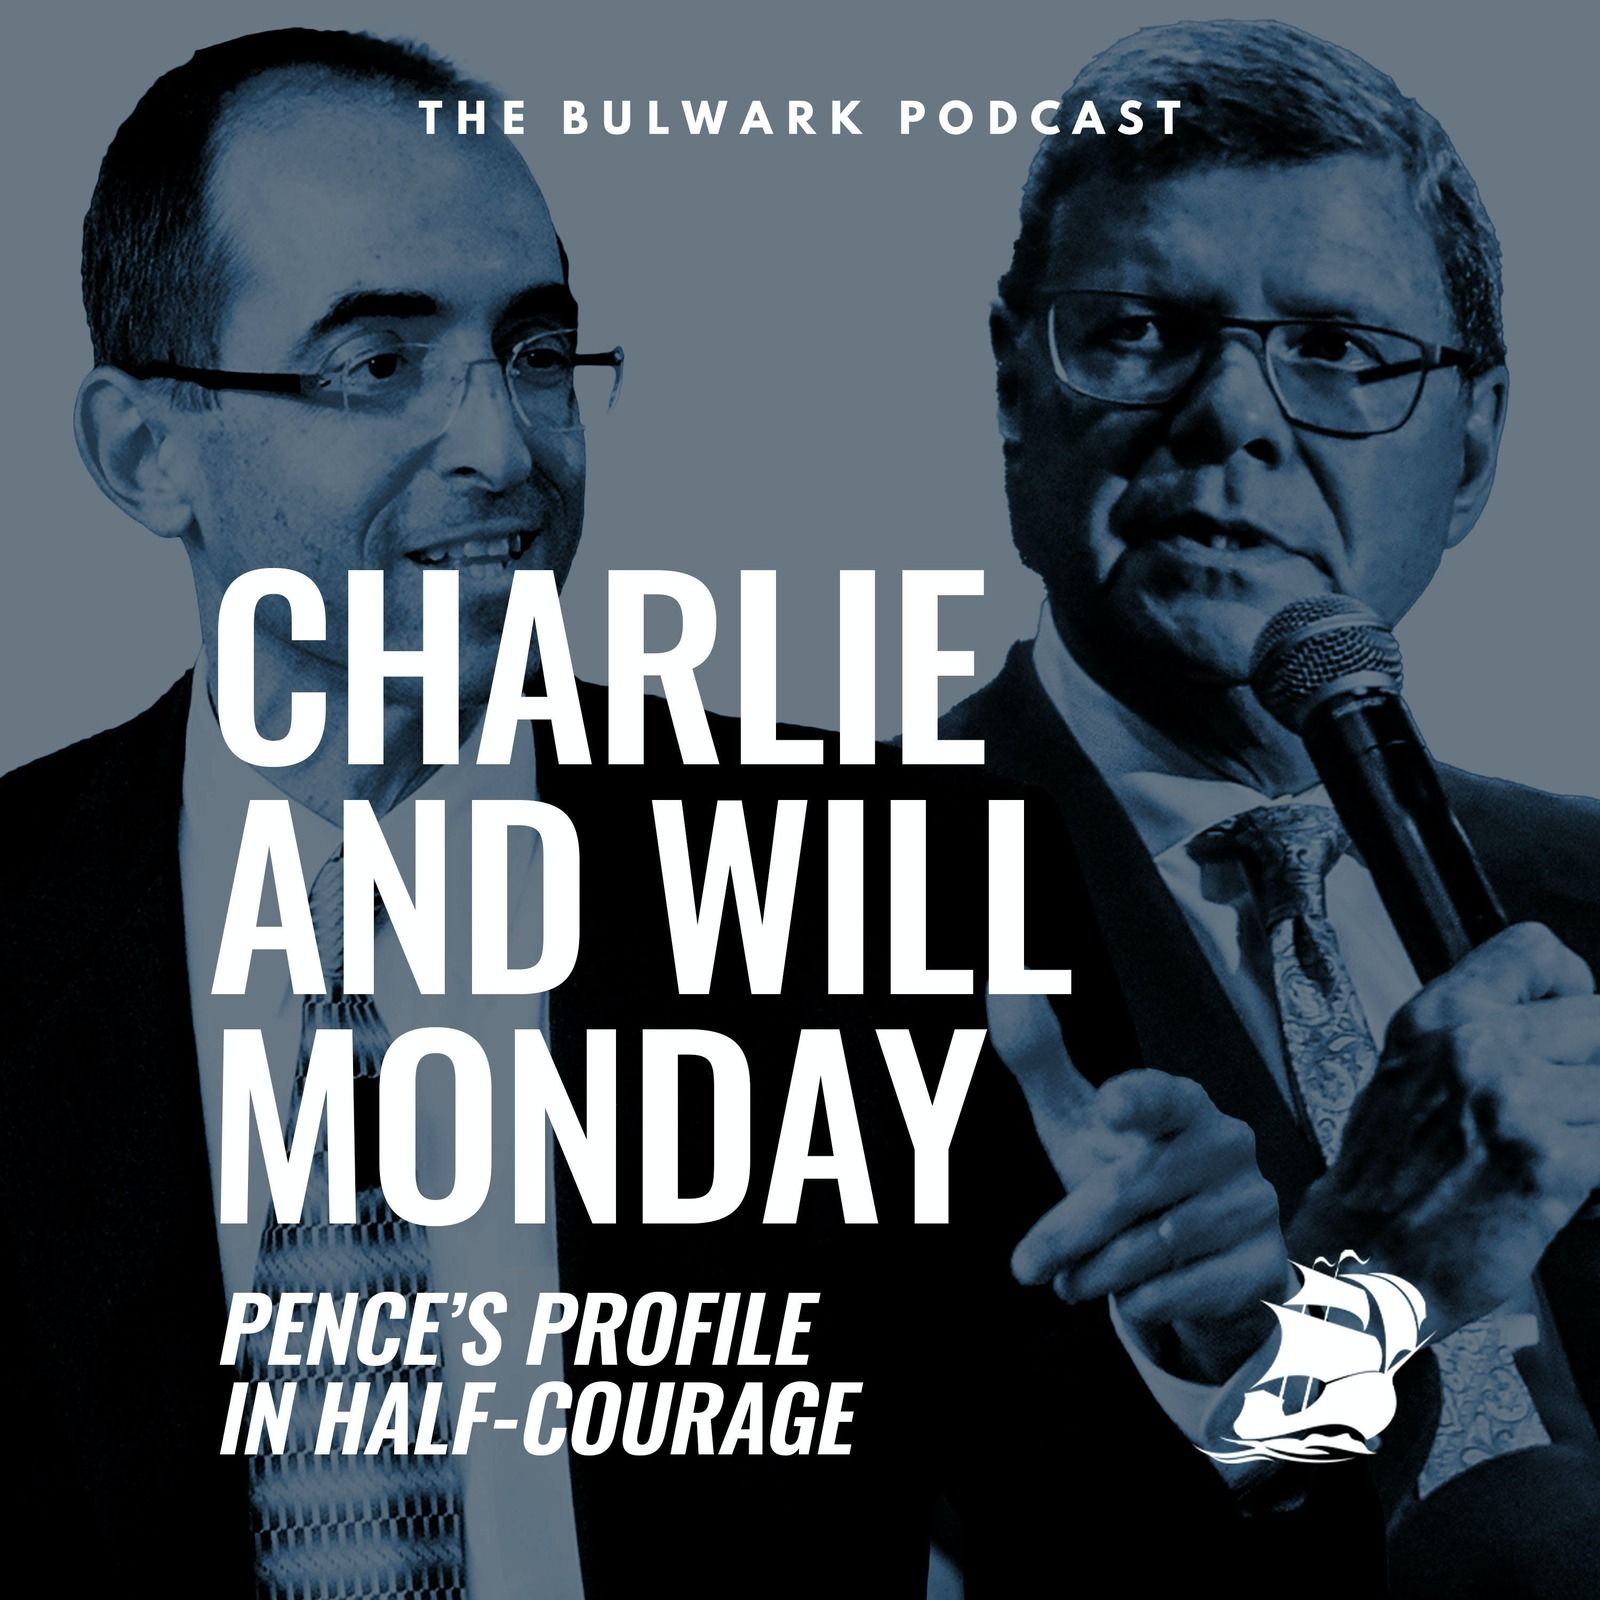 Will Saletan: Pence’s Profile in Half-Courage by The Bulwark Podcast